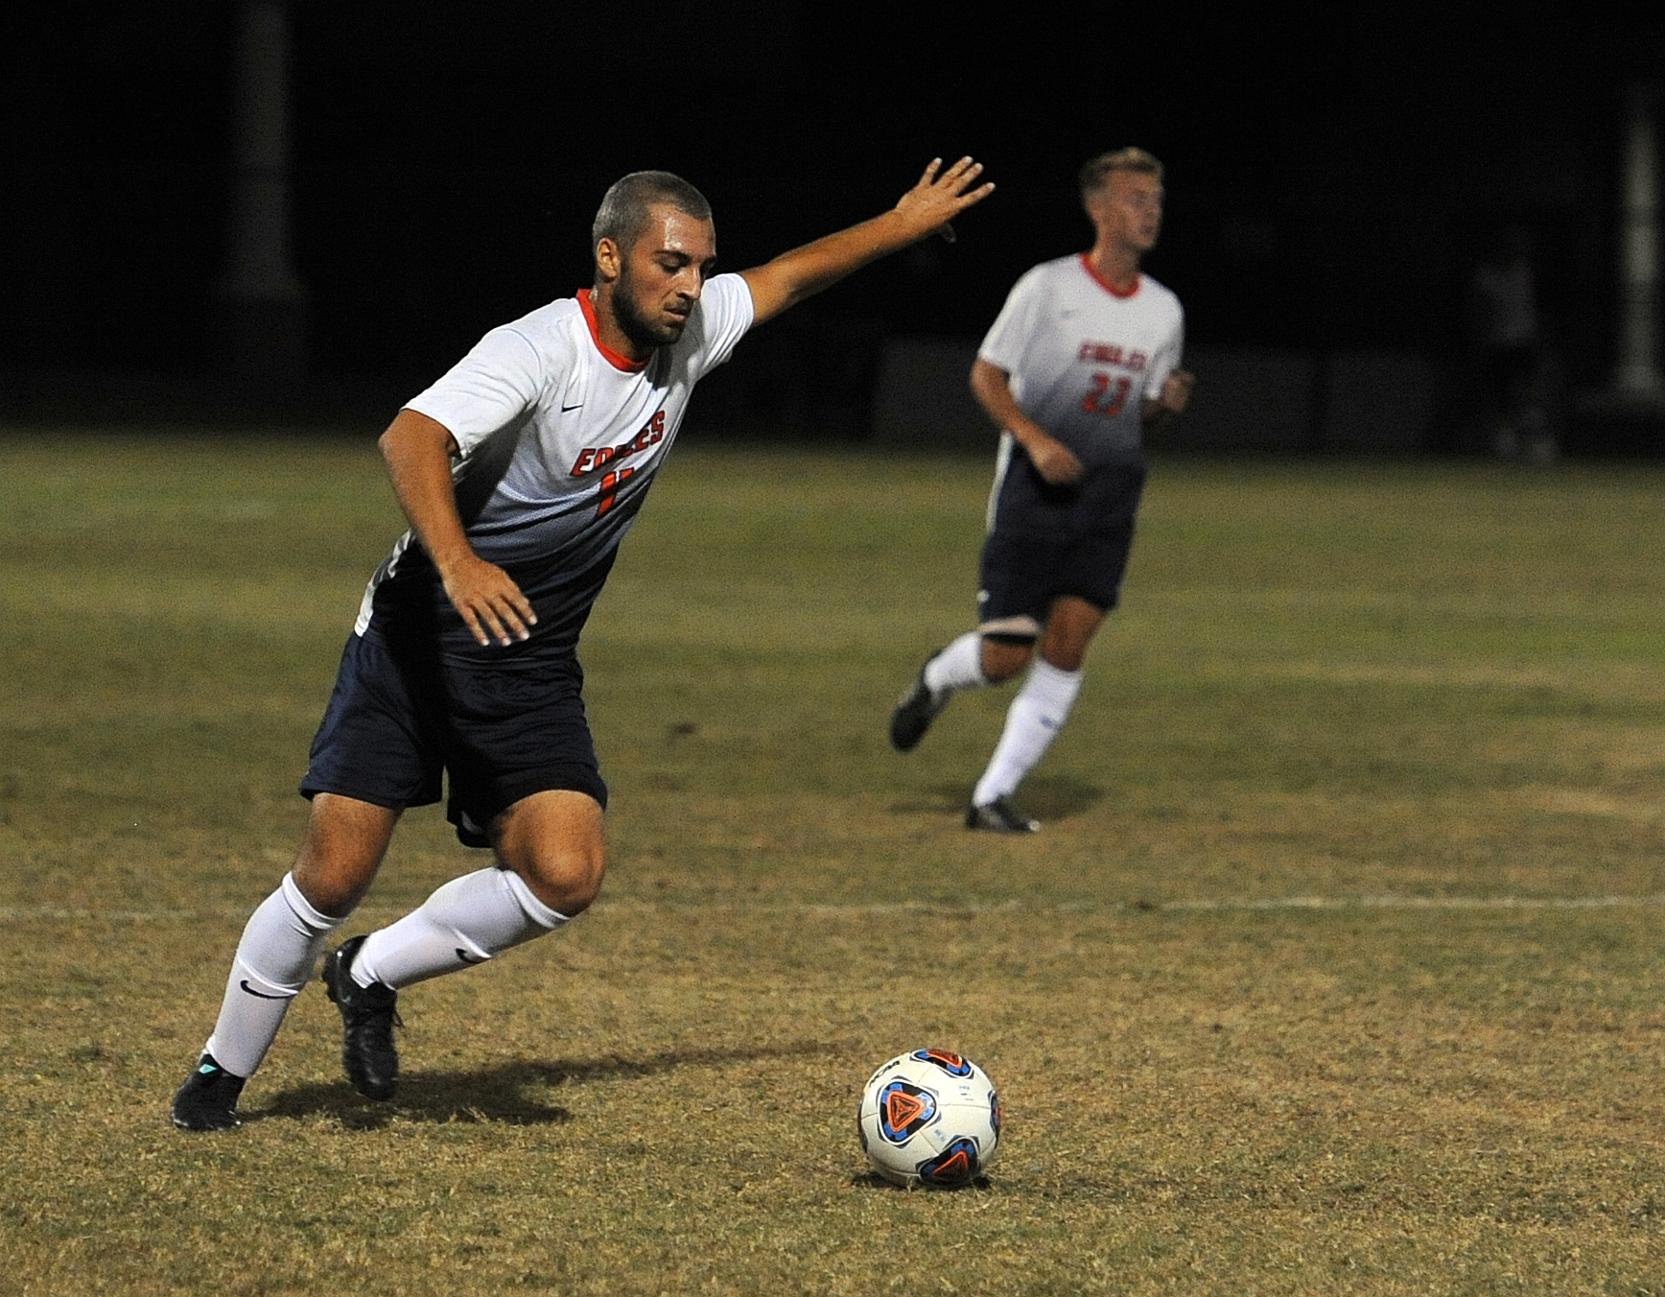 Season ends on sour note for Eagles with 3-1 loss to Coker